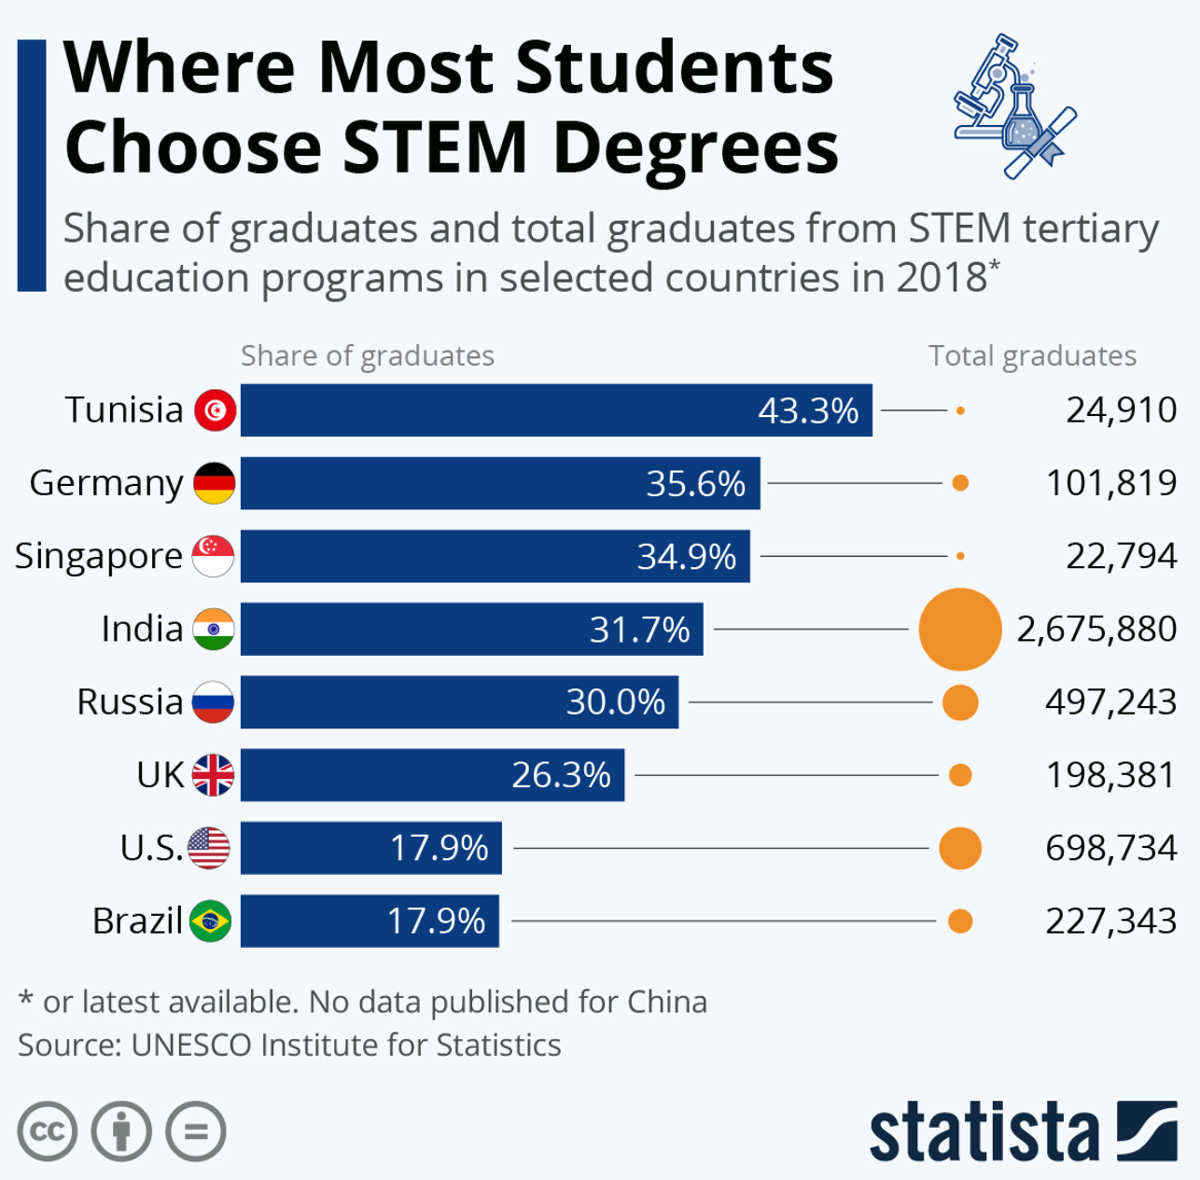 Share of graduates from STEM programs in selected countries in 2018